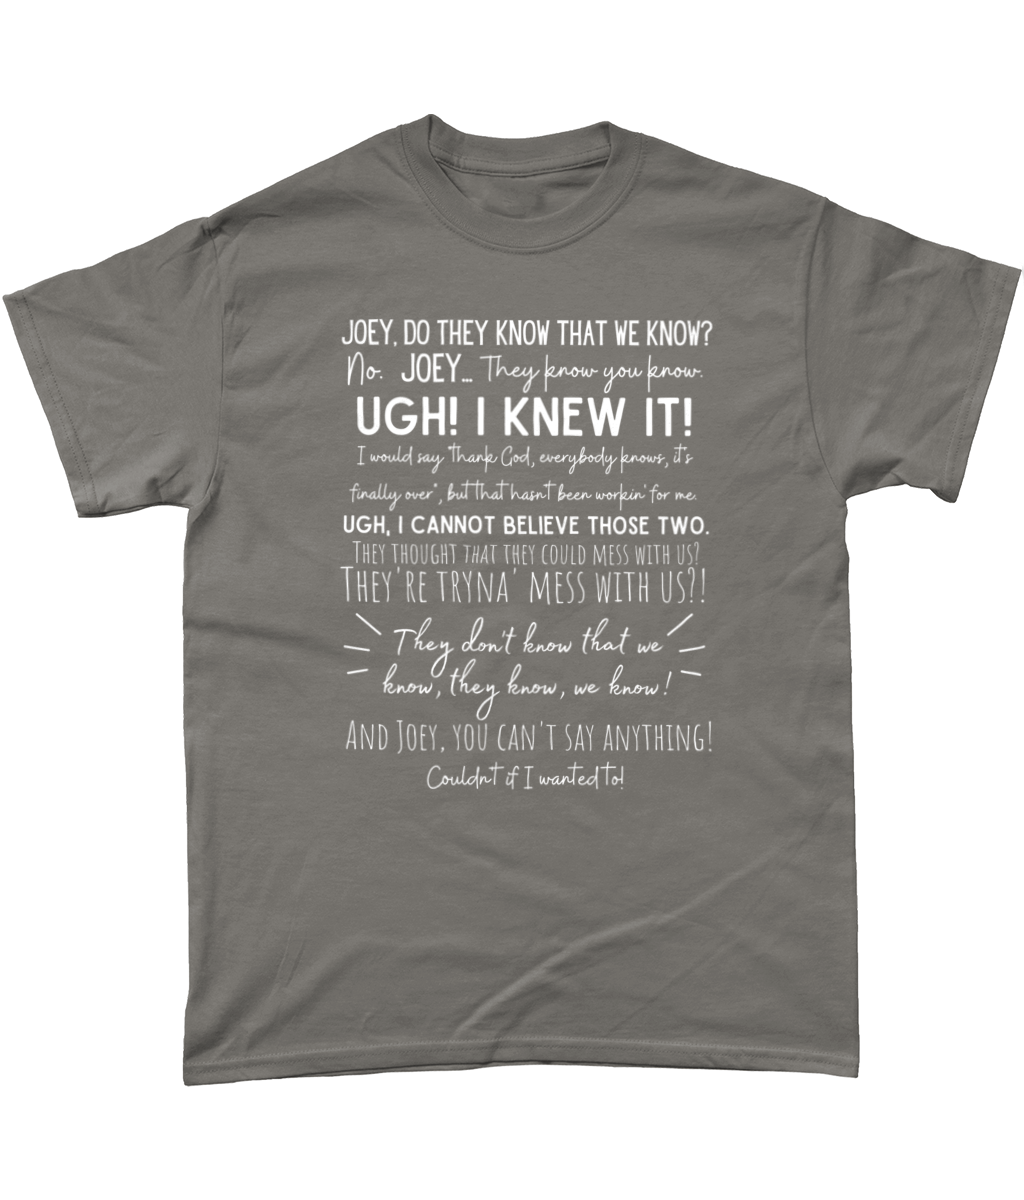 They Don't Know That We Know They Know T-Shirt